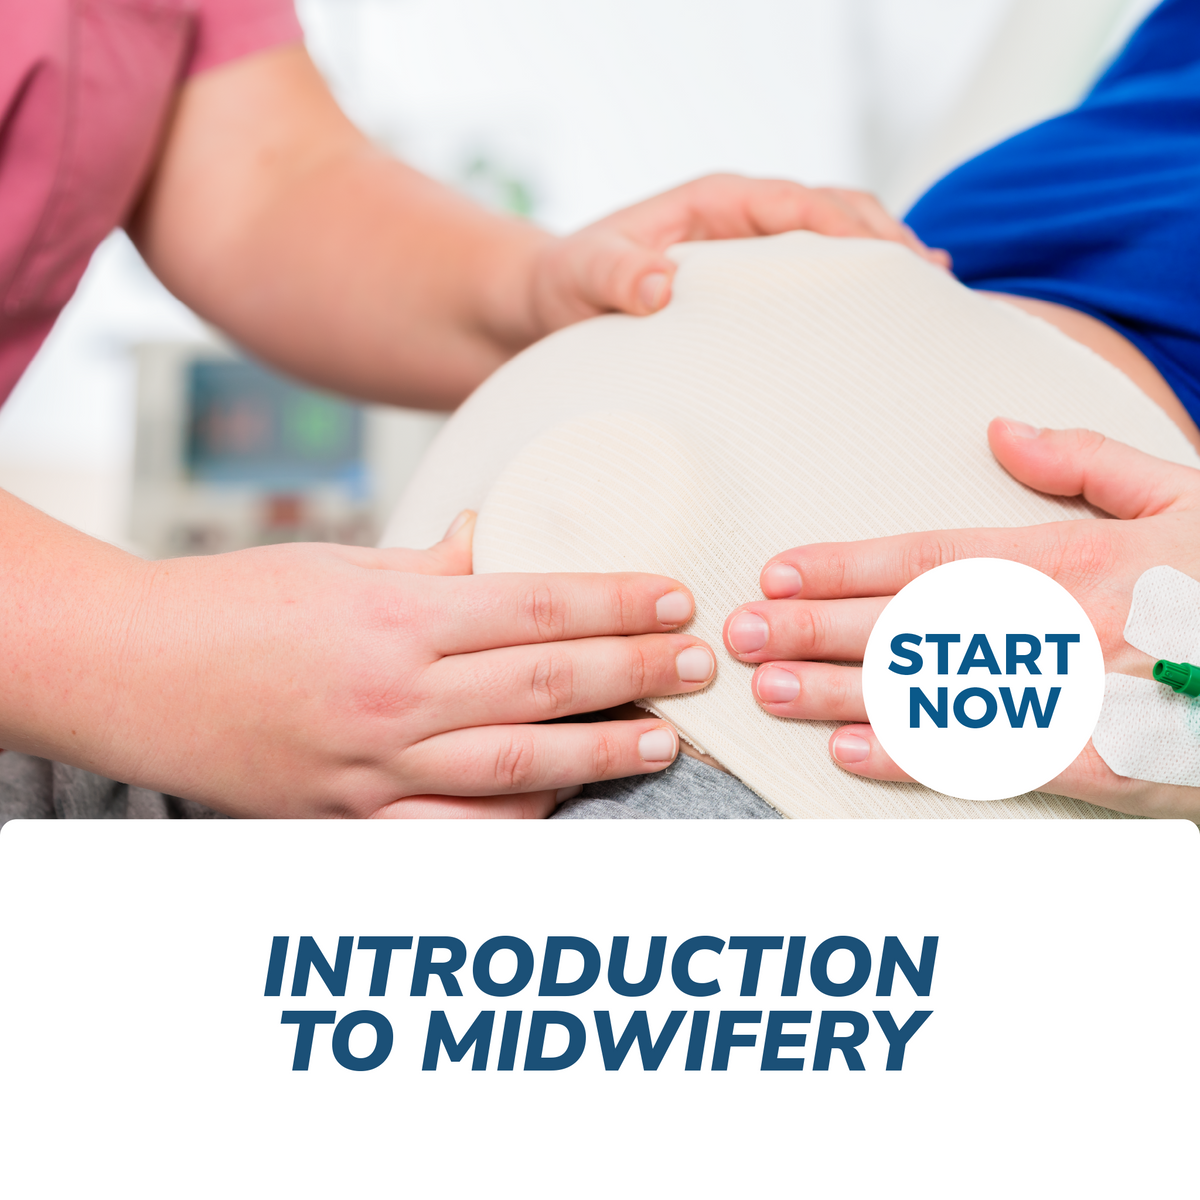 midwifery course work experience